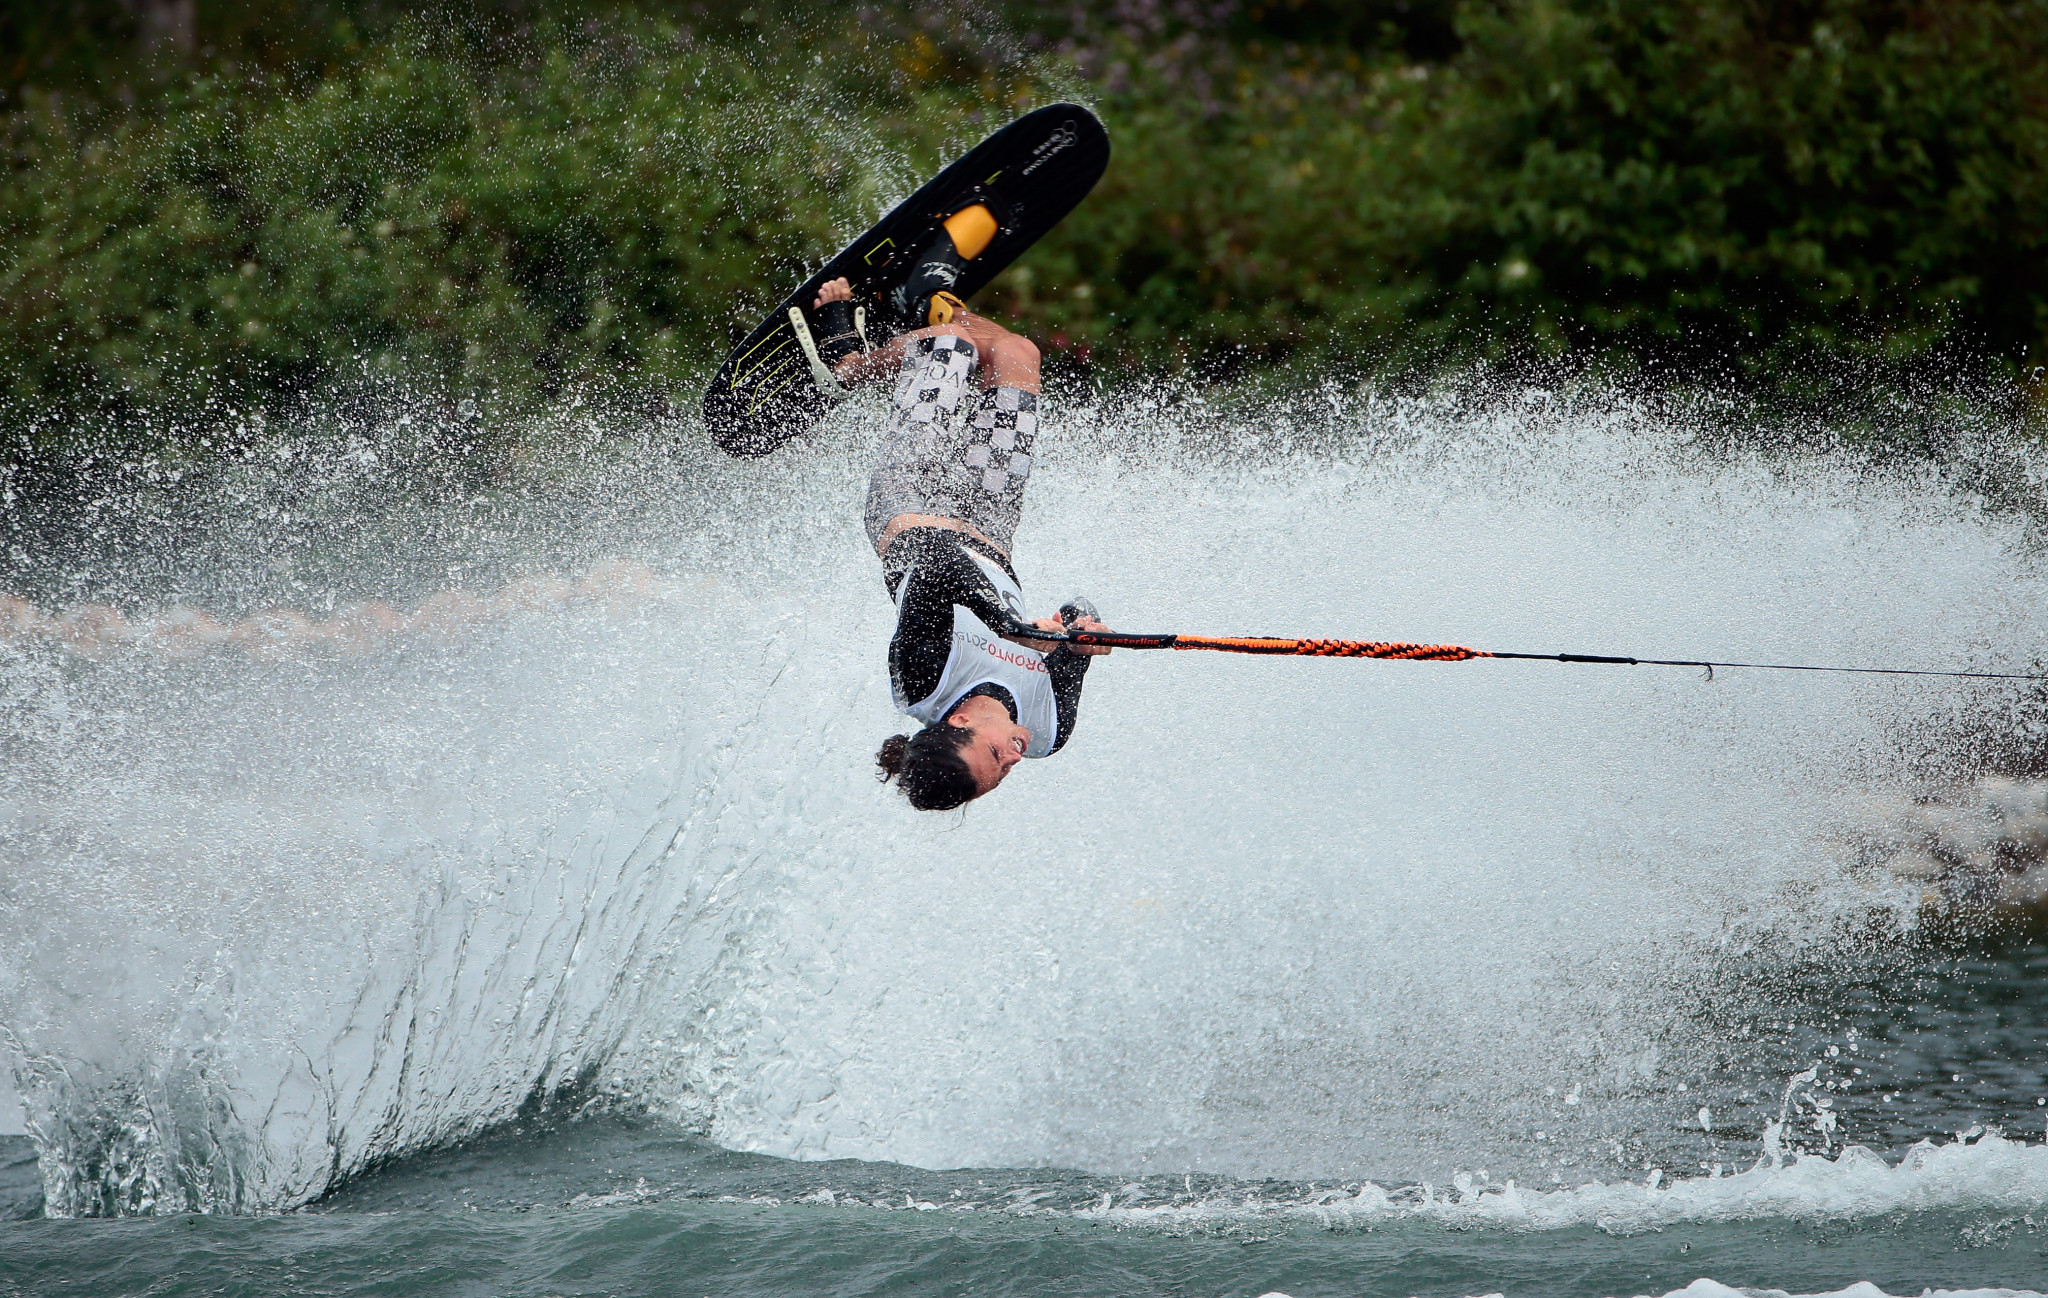 Adam Pickos led the US to the team title at the Water Ski World Championships ©Getty Images